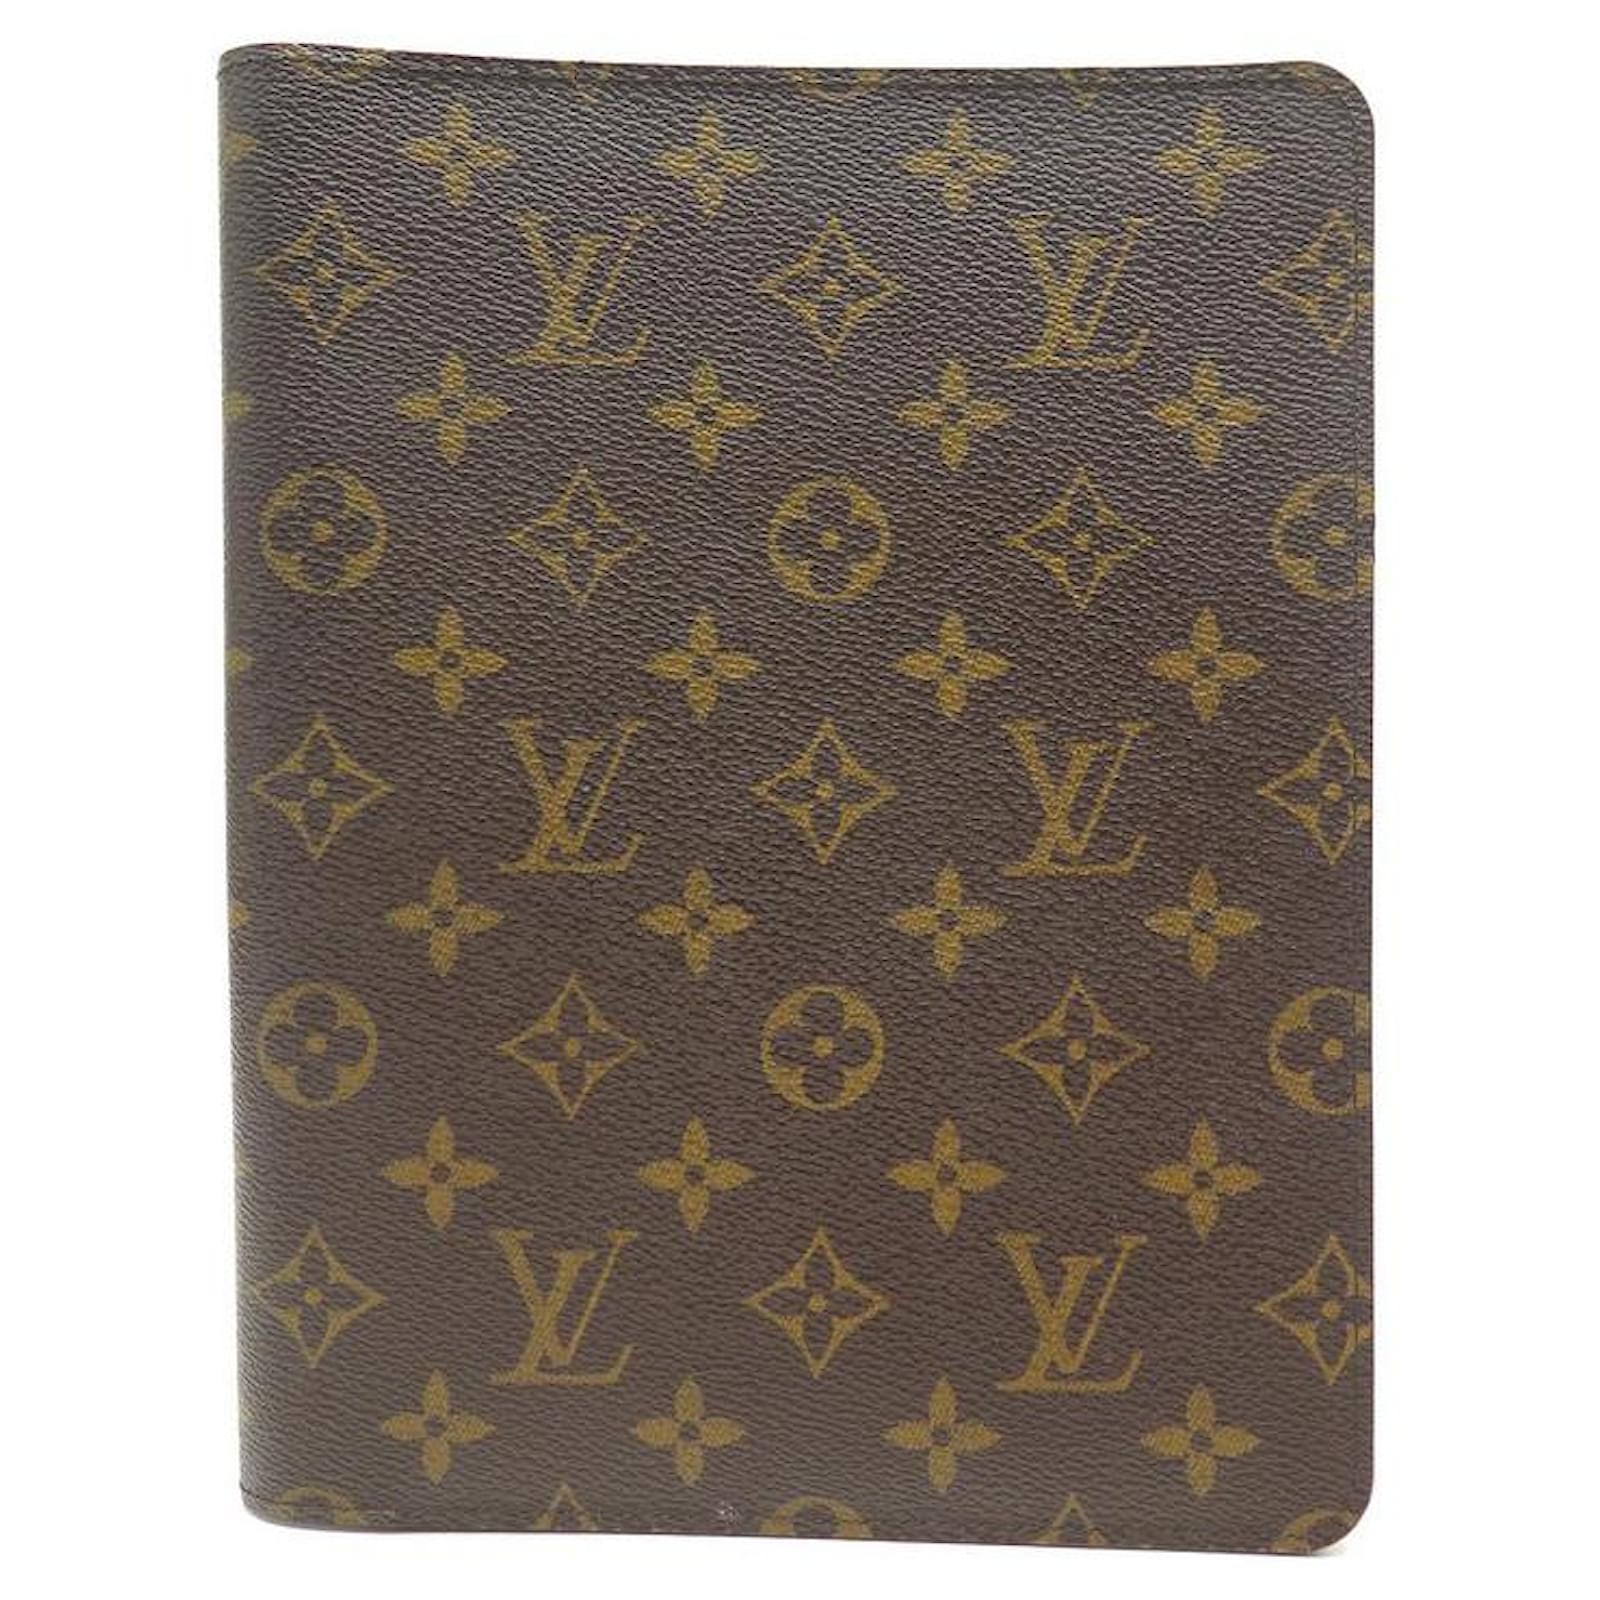 NEW LOUIS VUITTON OFFICE AGENDA COVER CANVAS MONOGRAM DIARY COVER